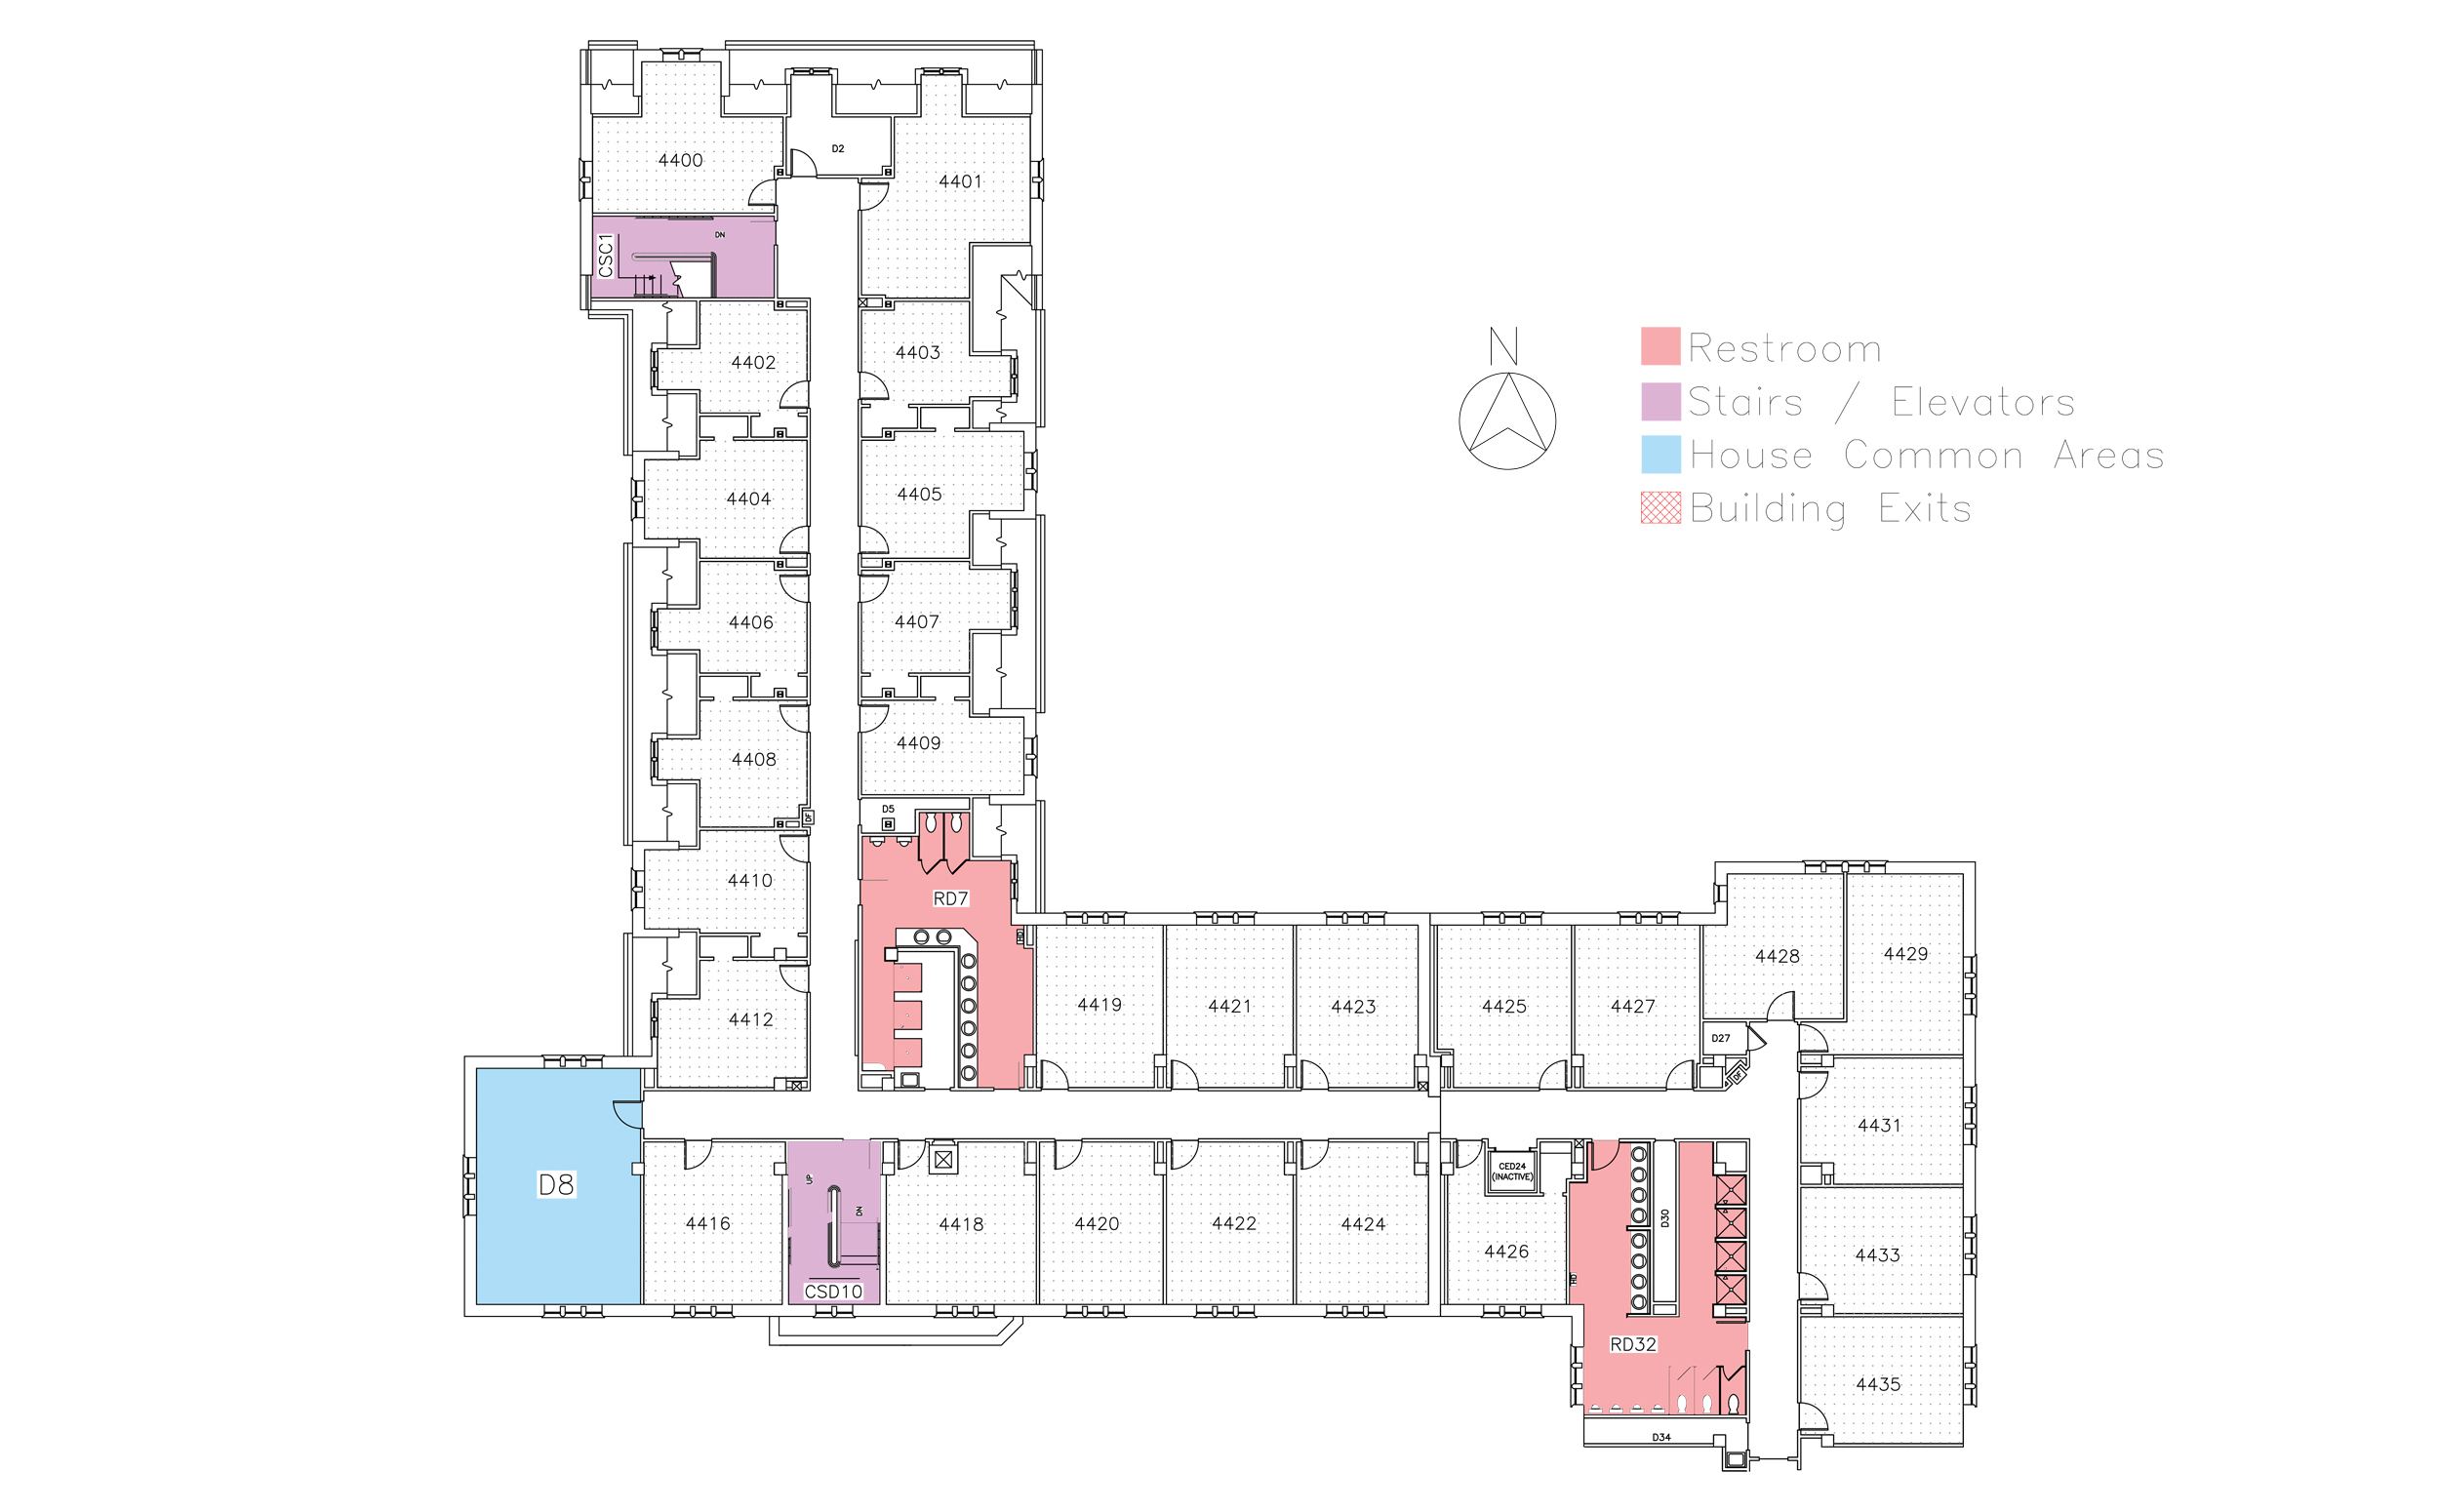 Floor plan for Lincoln House, fourth floor in Friley Hall. Identifies the location of rooms, bathrooms and common space.